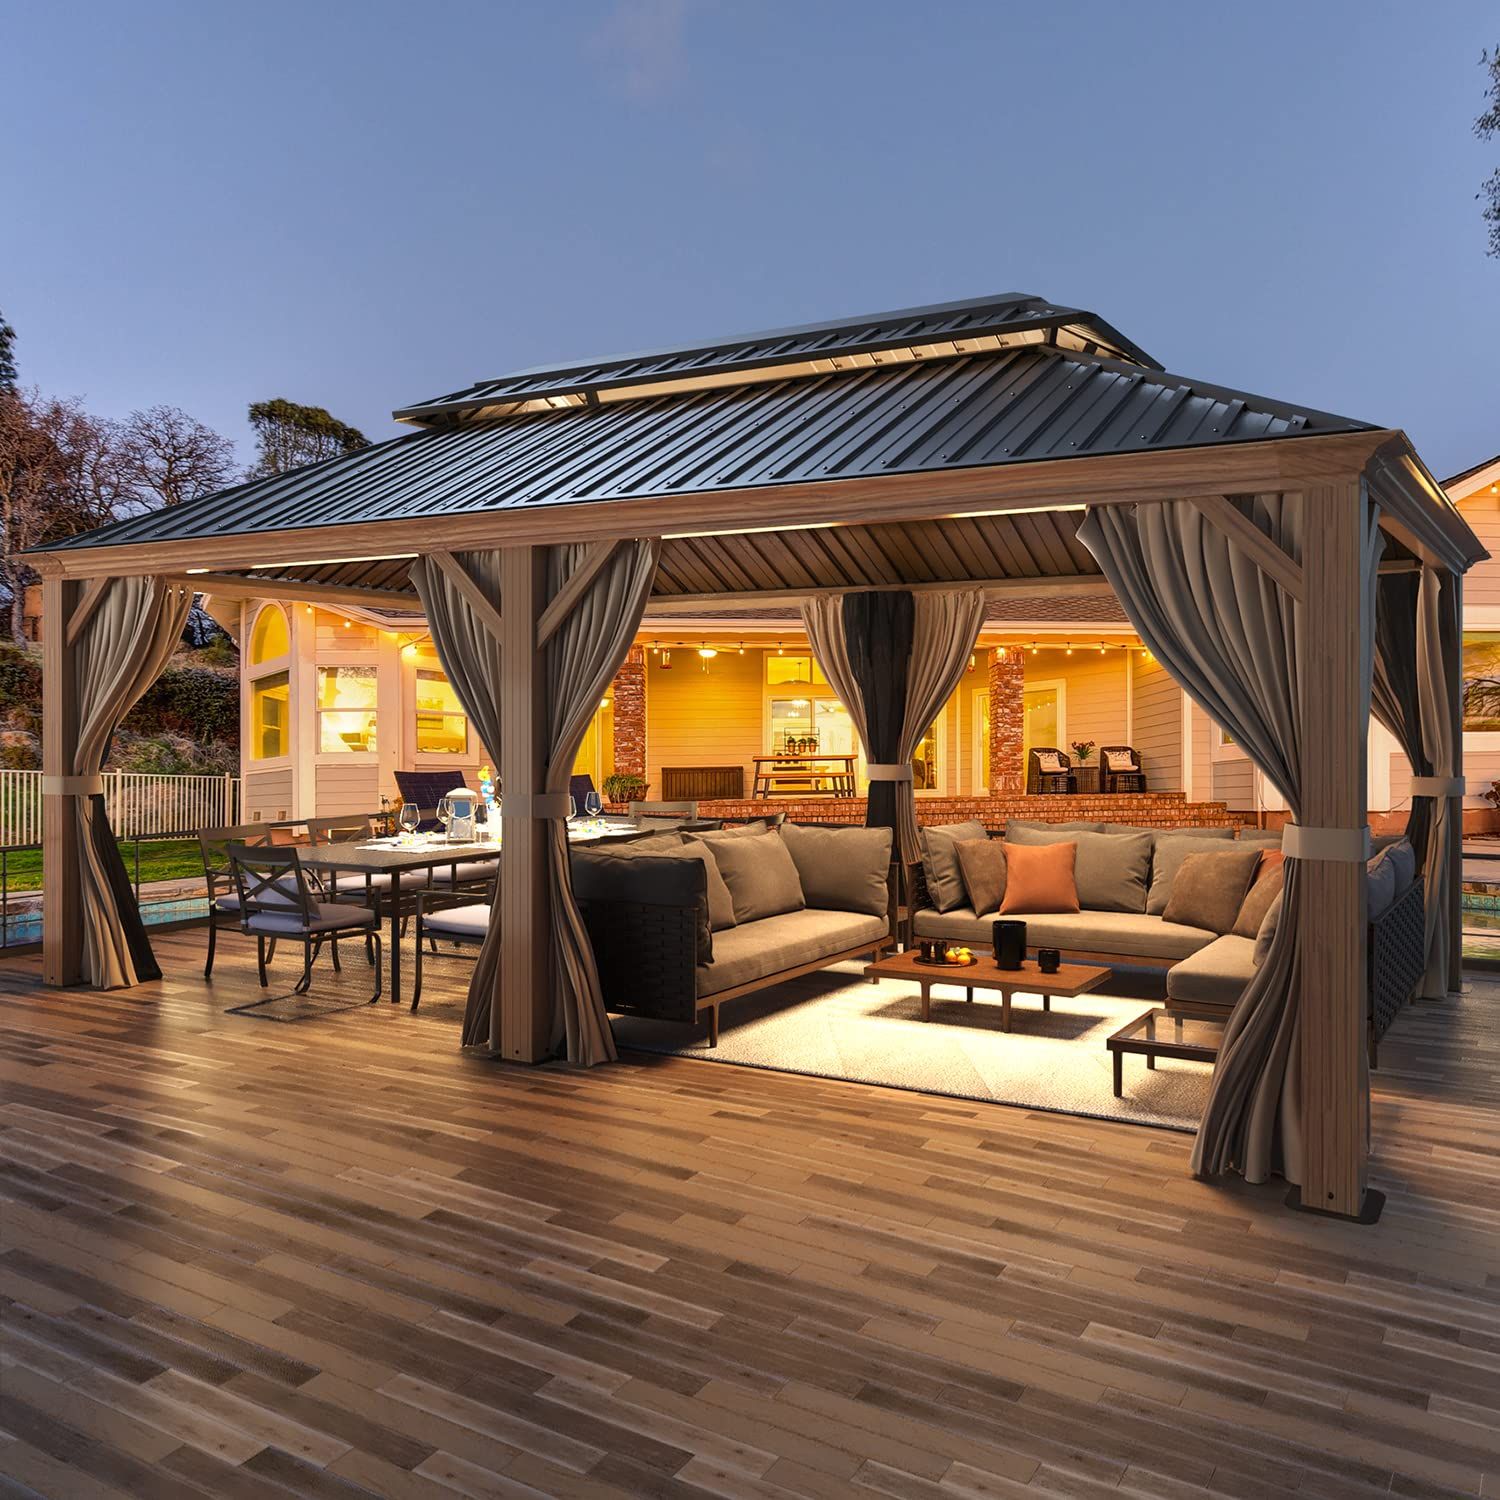 The Beauty and Utility of Outdoor Gazebos